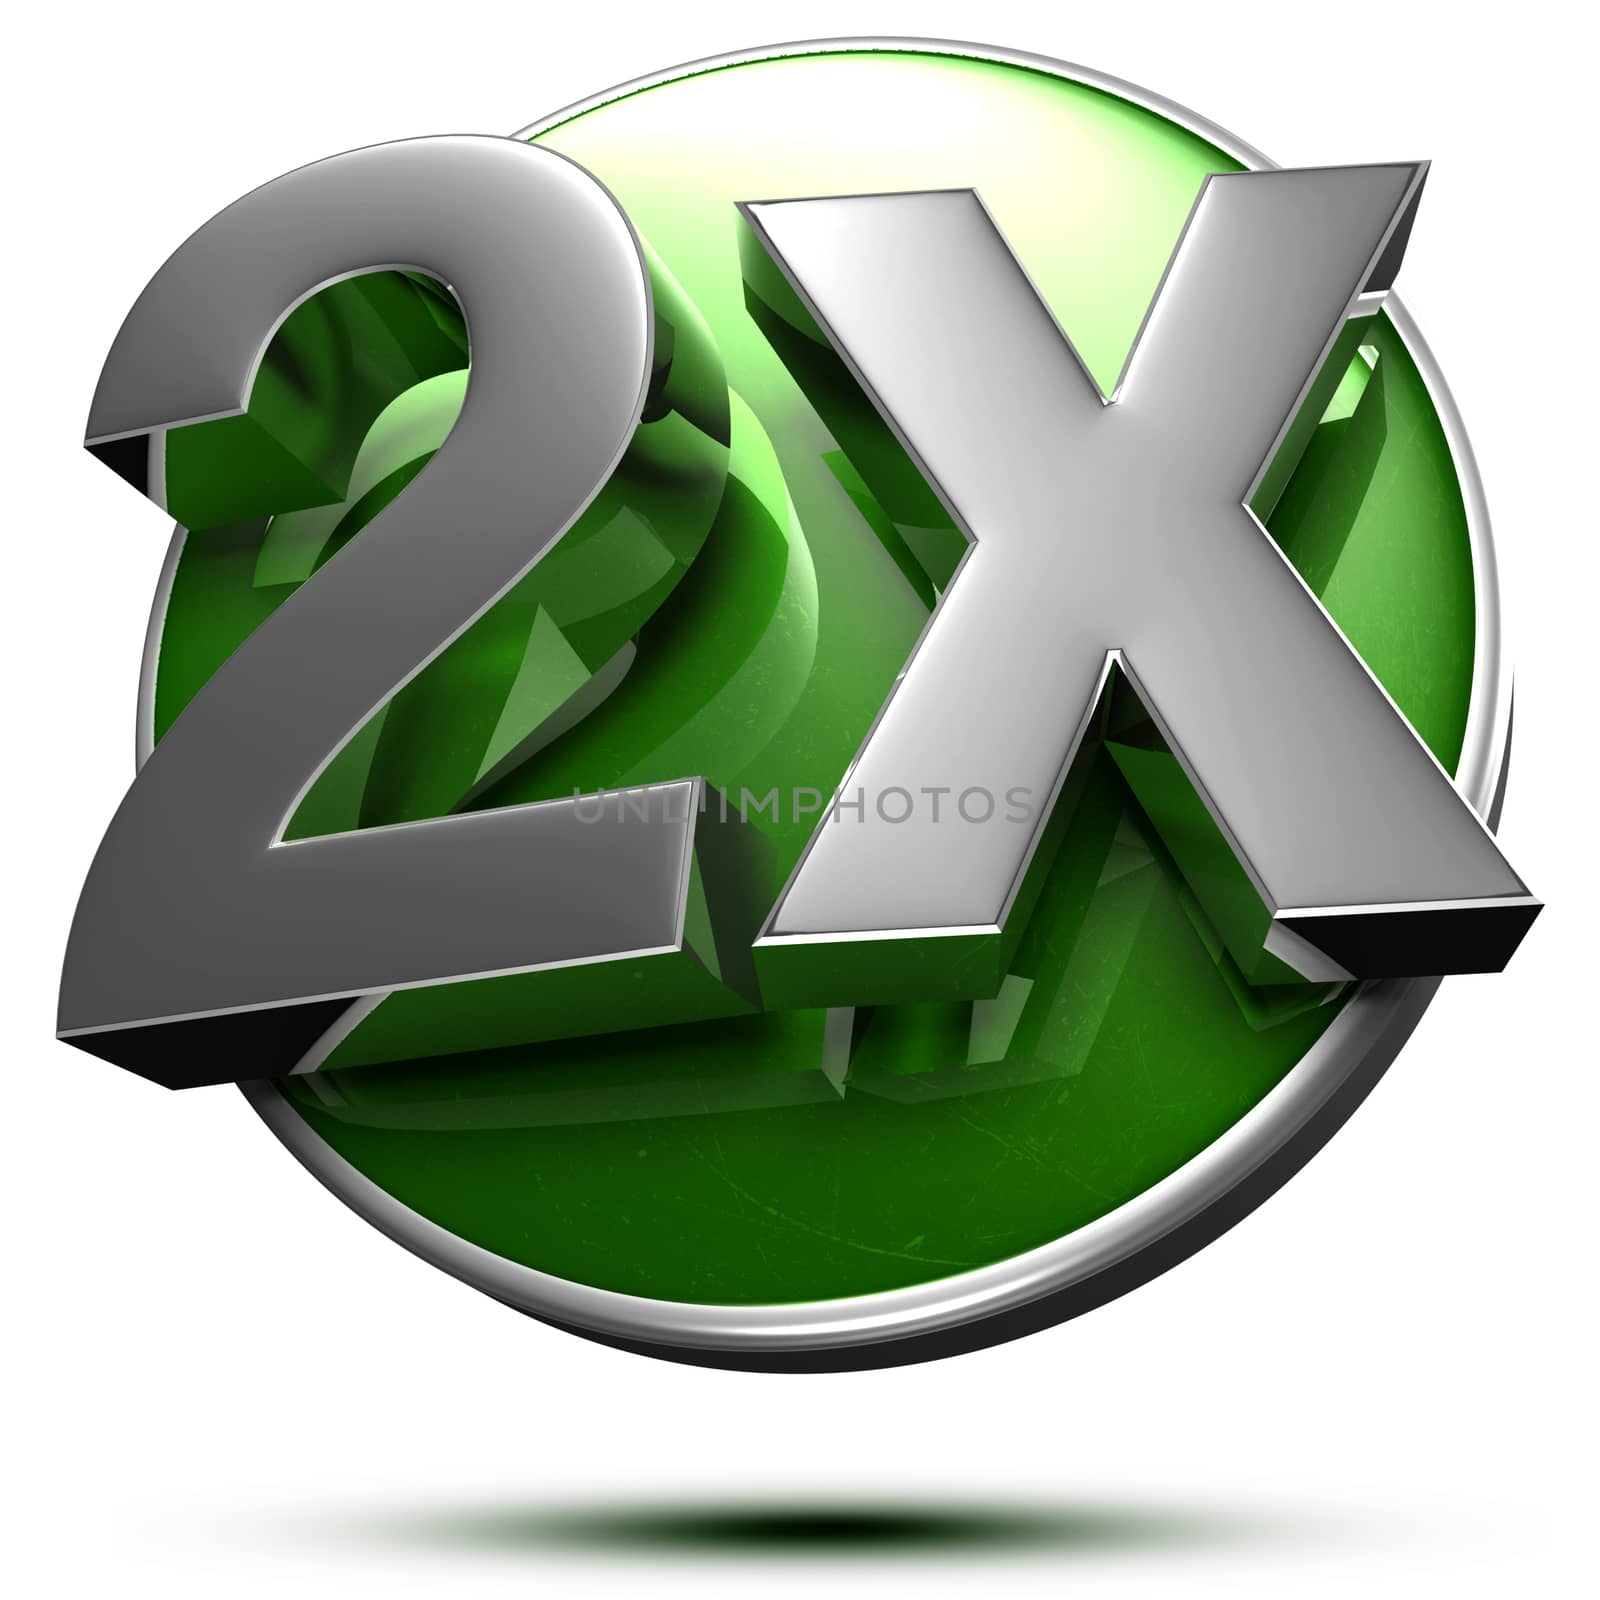 2x 3d rendering on the green circle behind the white background.(with Clipping Path).